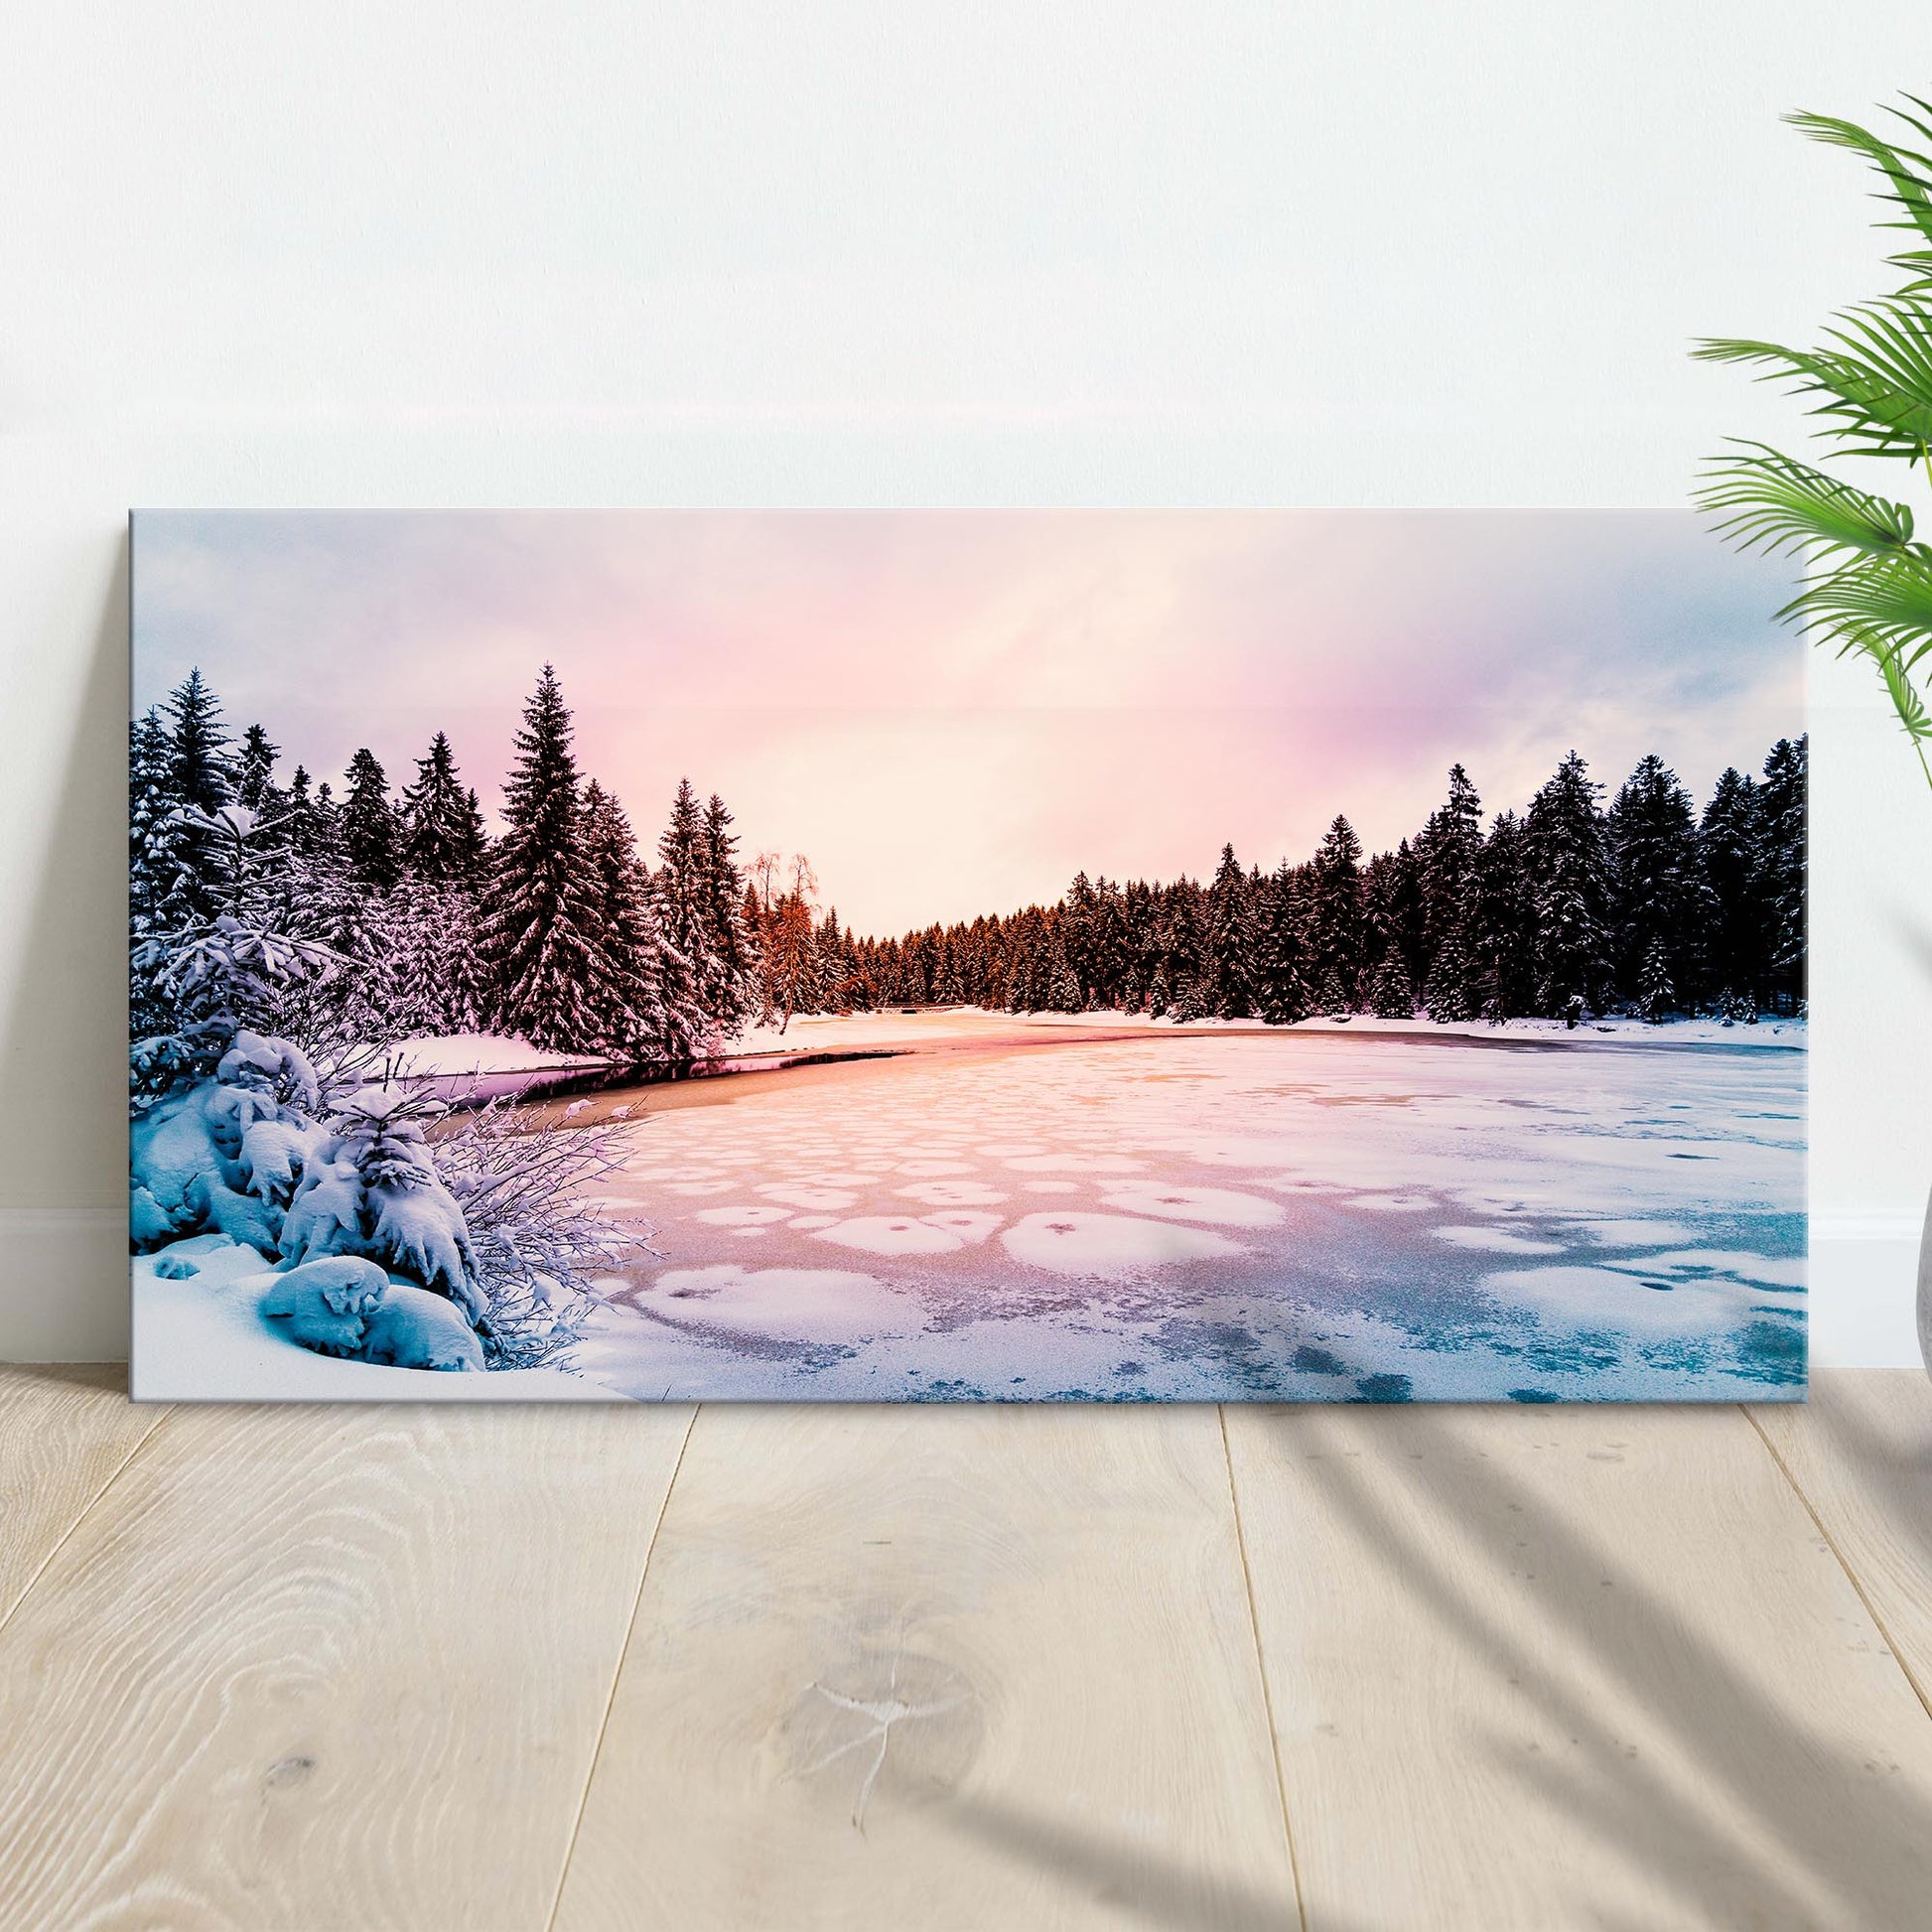 Winter Lake Wonderland Canvas Wall Art - Image by Tailored Canvases